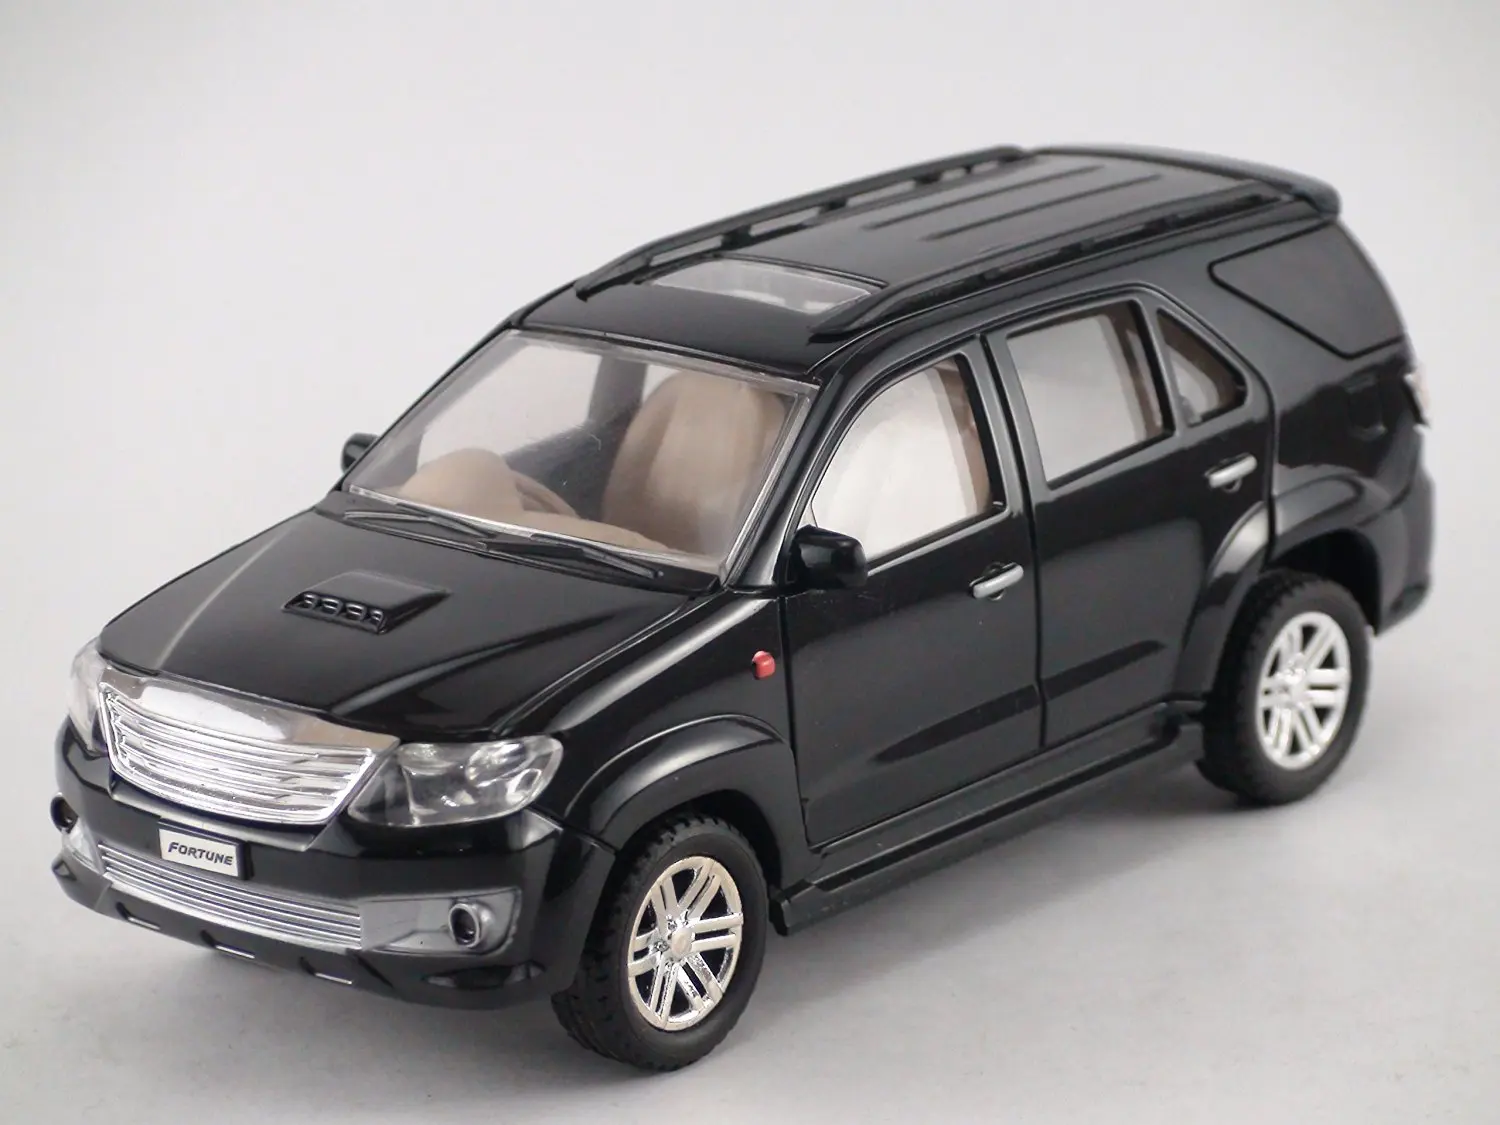 fortuner toy car price